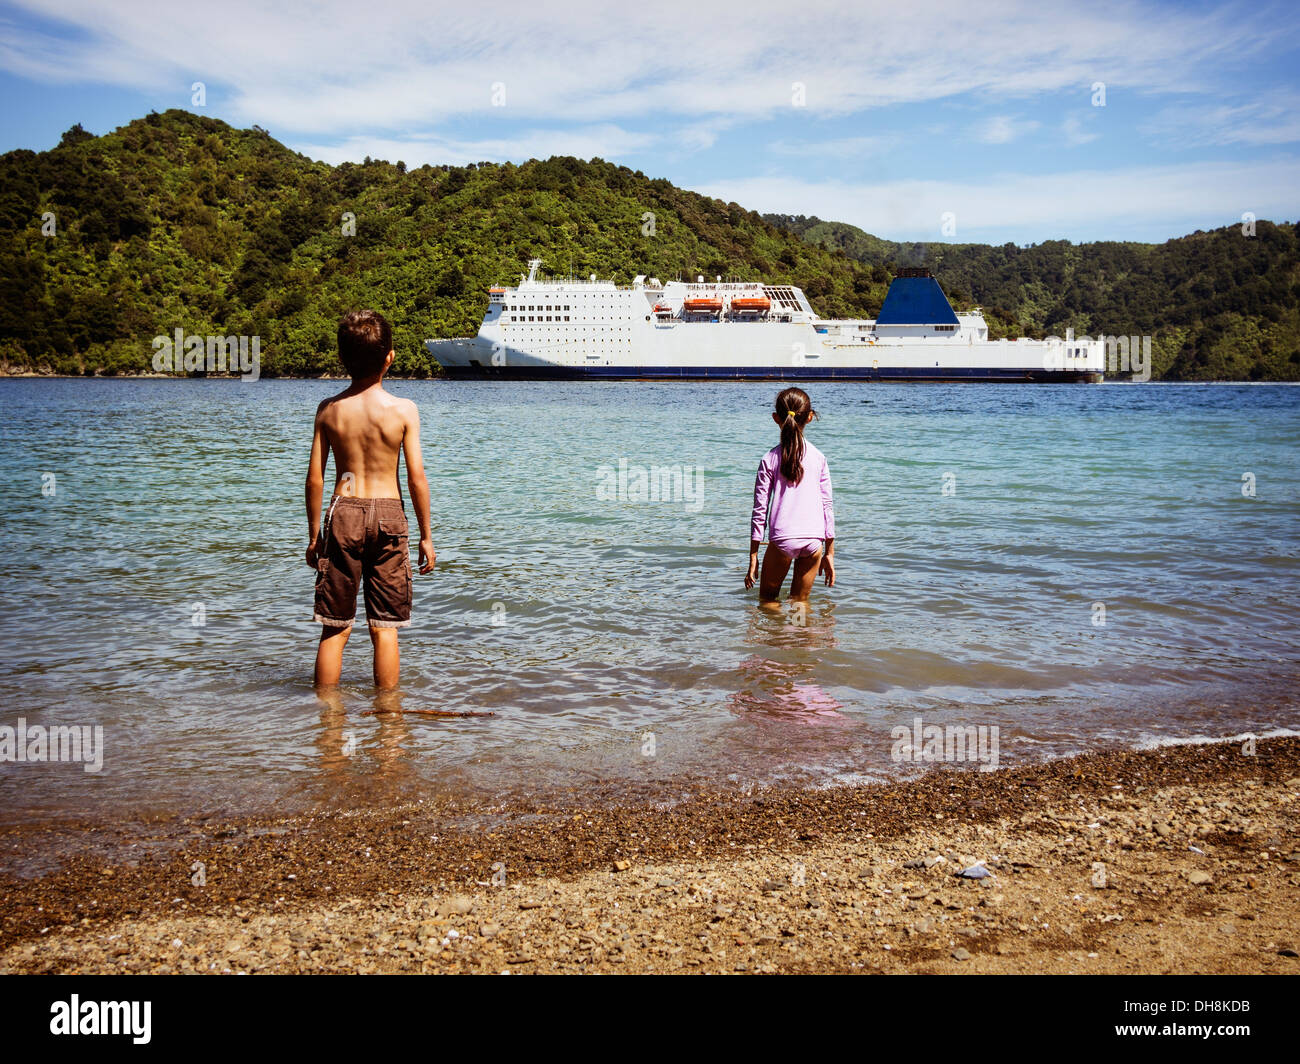 Watching the ferry arrive, Picton, Marlborough Sounds, New Zealand. Logos removed. Stock Photo